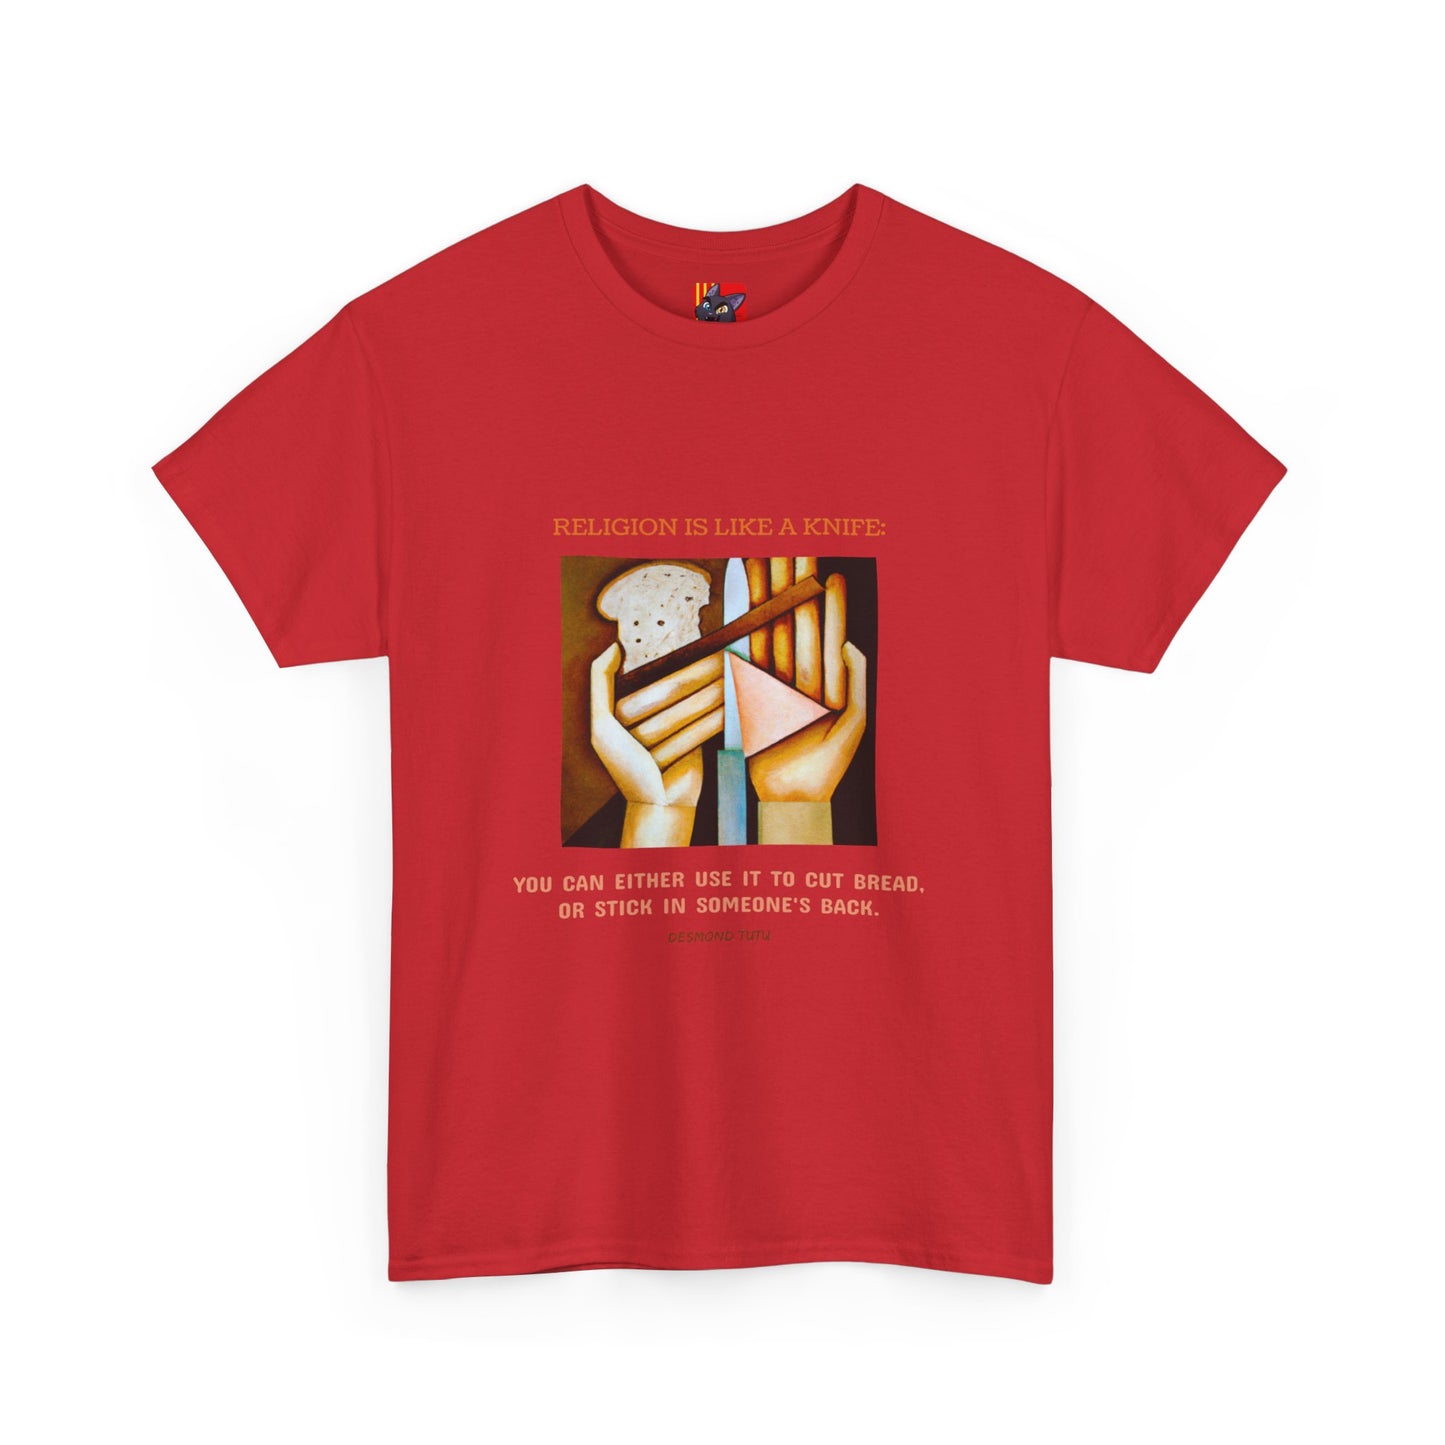 The Double-Edged Sword T-Shirt: Use Your Power Wisely"Religion is like a knife..." Desmond Tutu